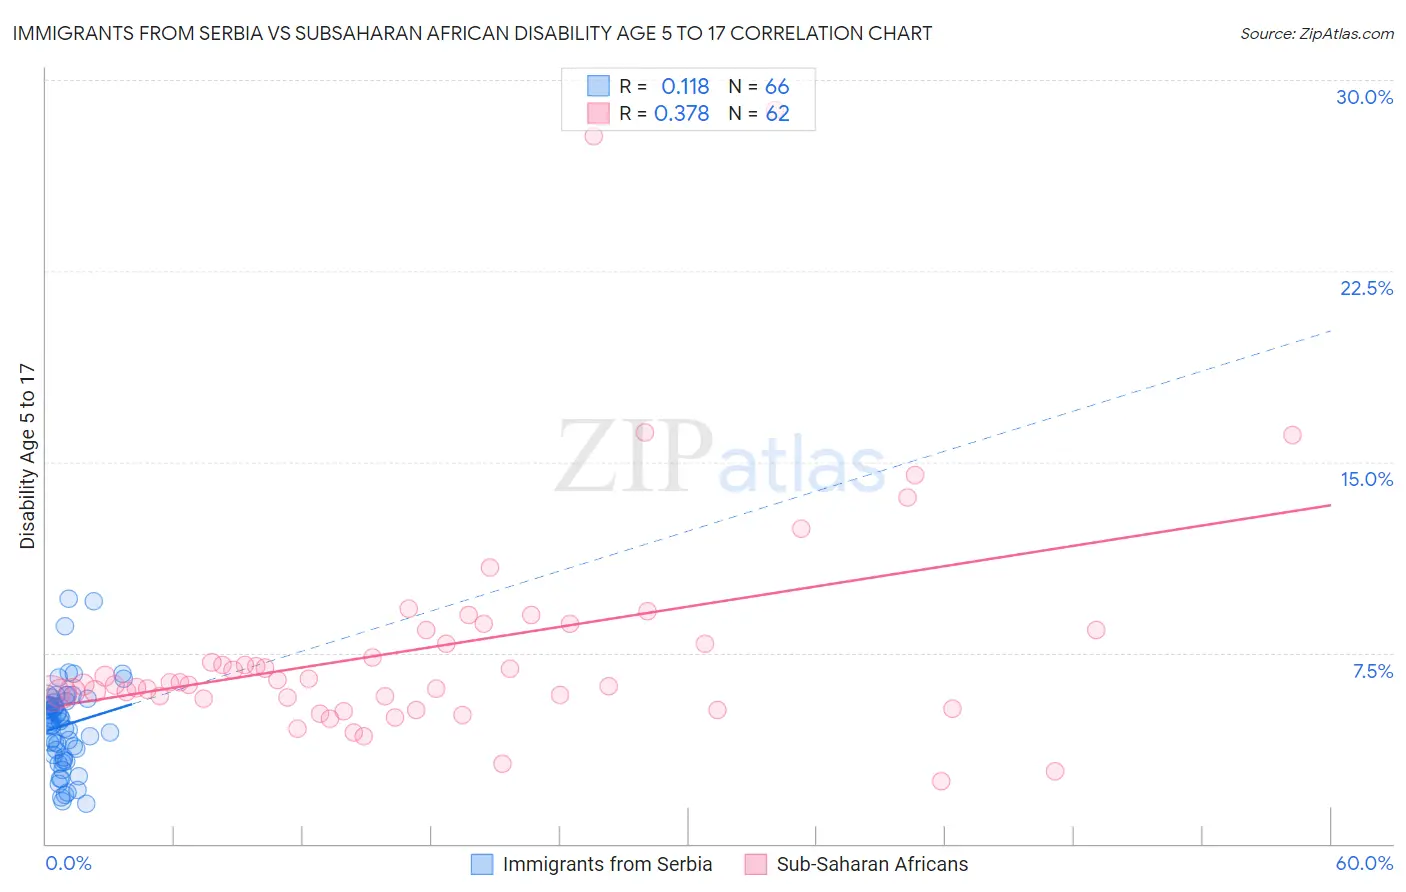 Immigrants from Serbia vs Subsaharan African Disability Age 5 to 17